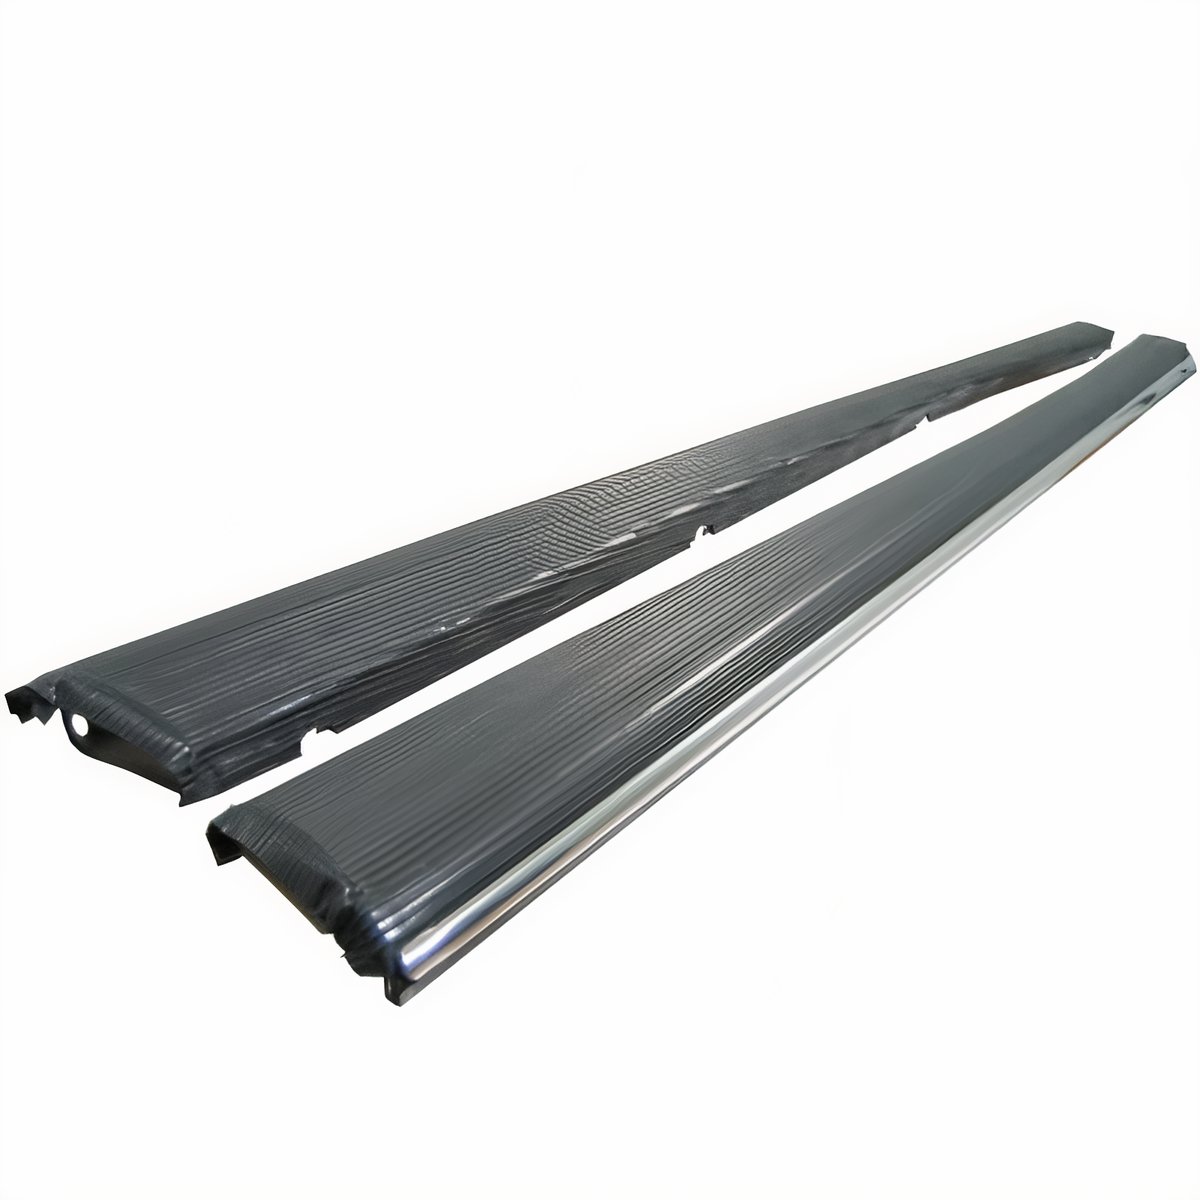 VW Running Boards - Heavy Duty - Pair - Made in Mexico